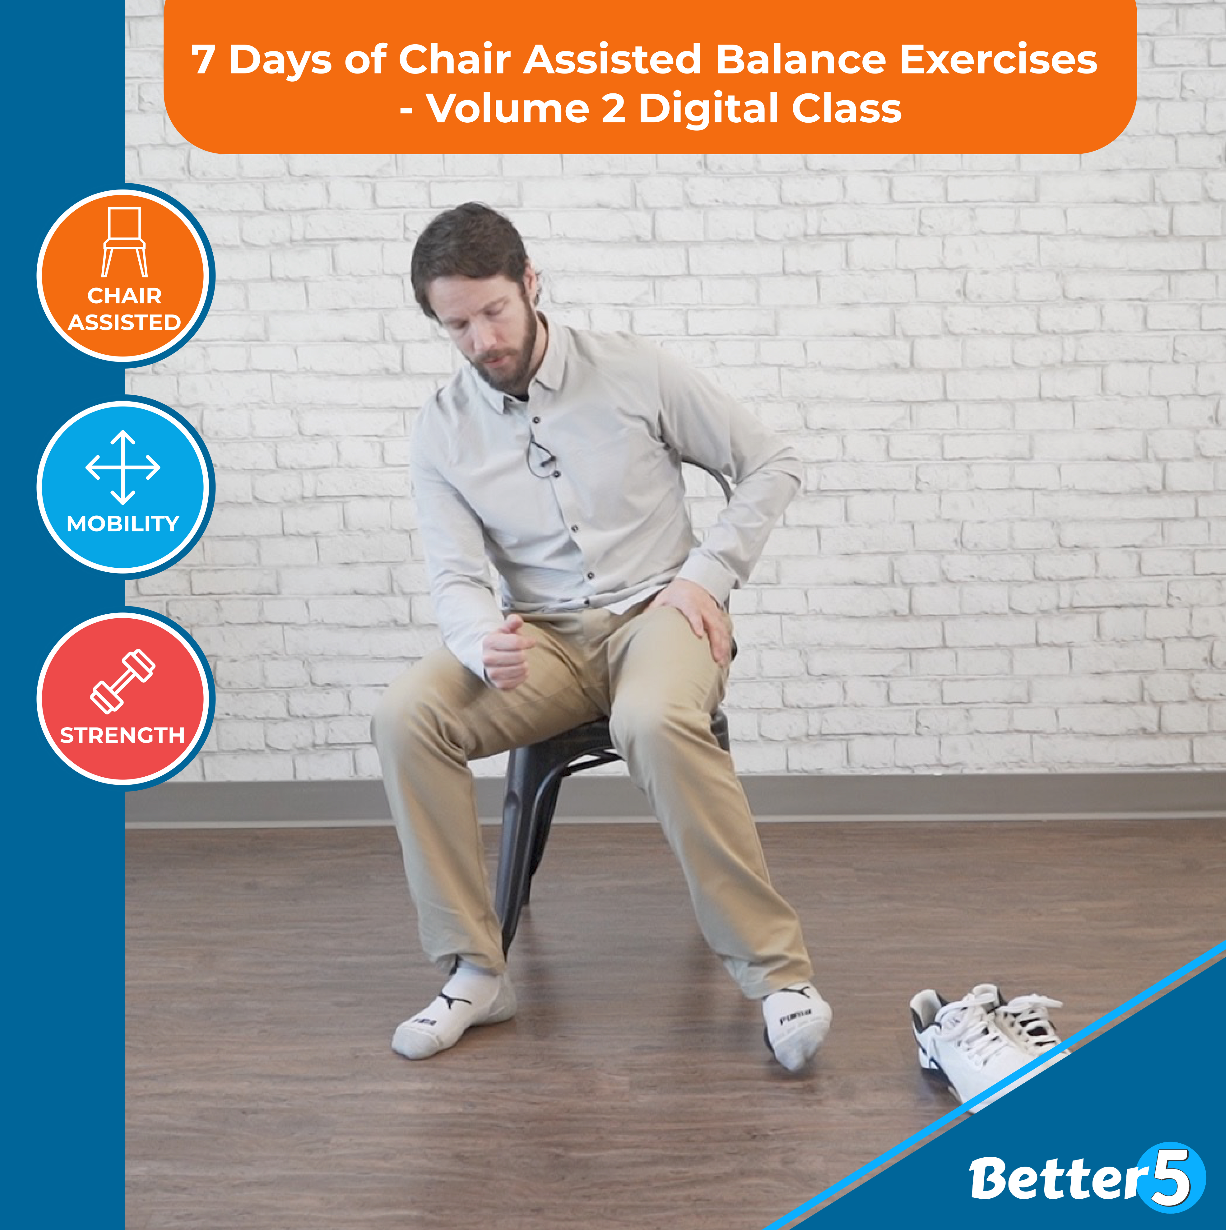 7 Days of Chair Assisted Balance Exercises - Volume 2 Digital